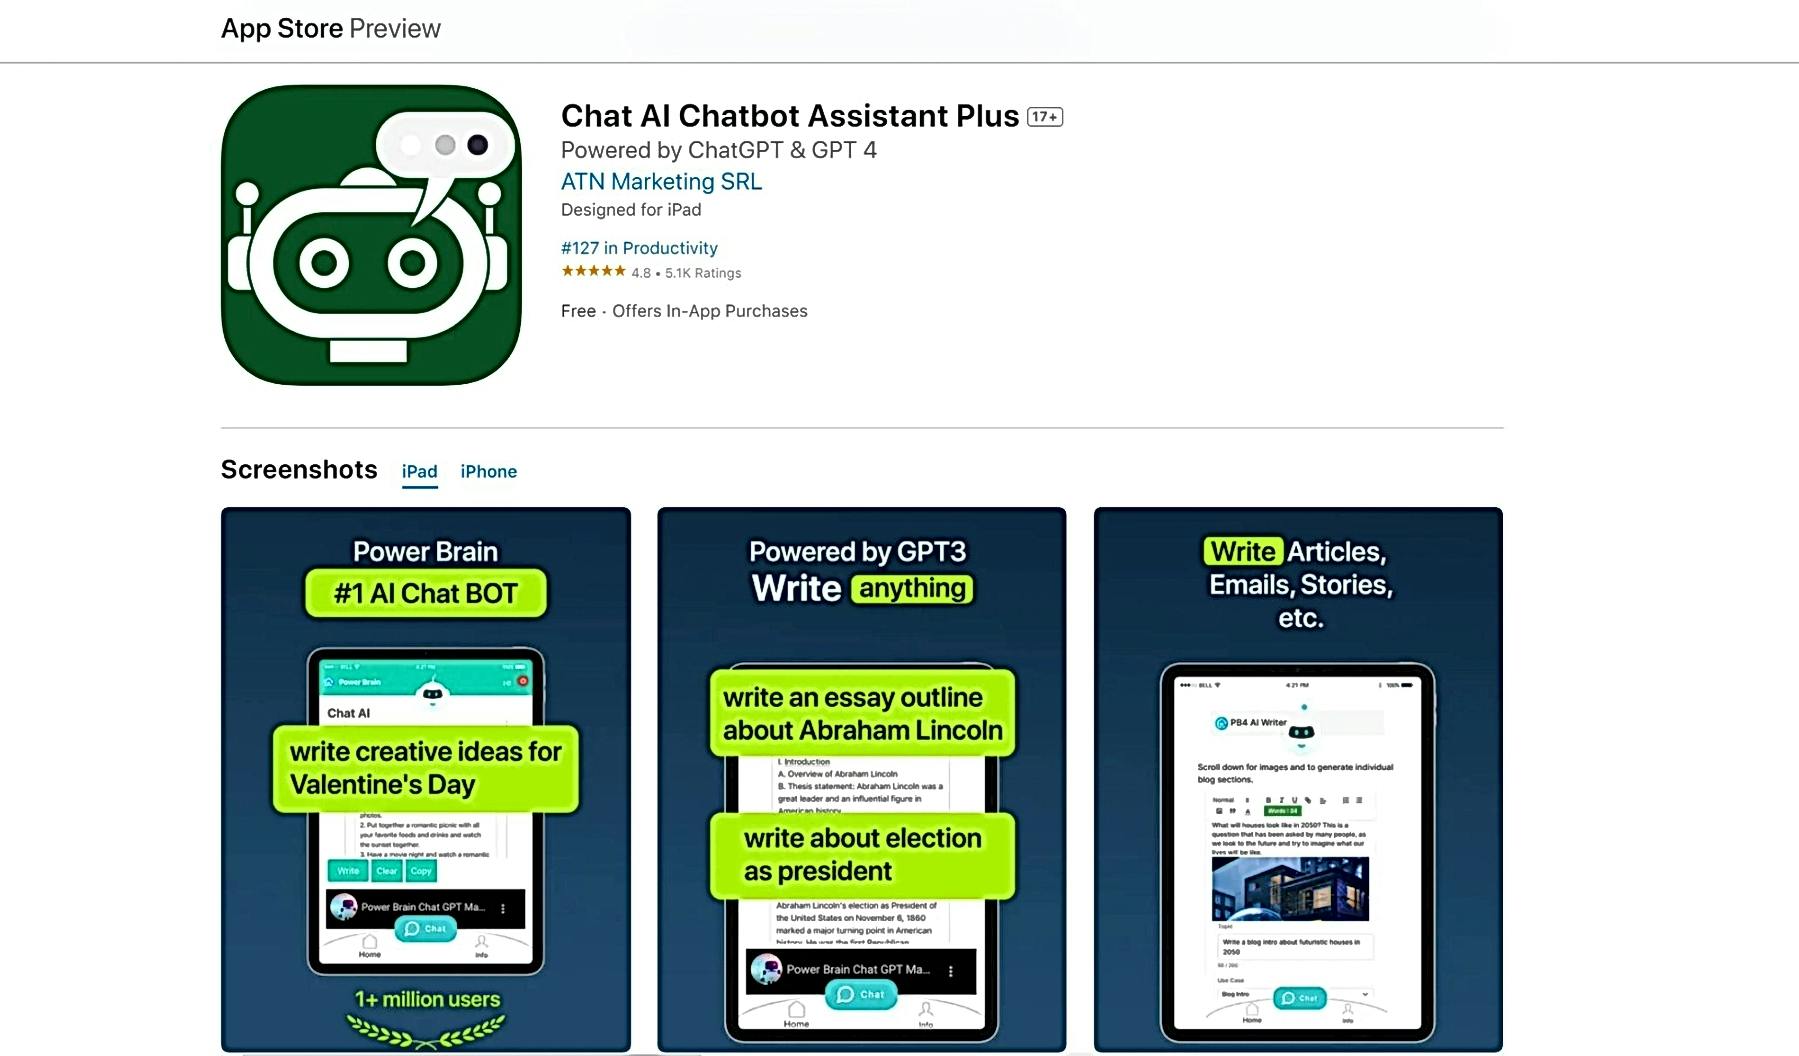 Chat AI featured